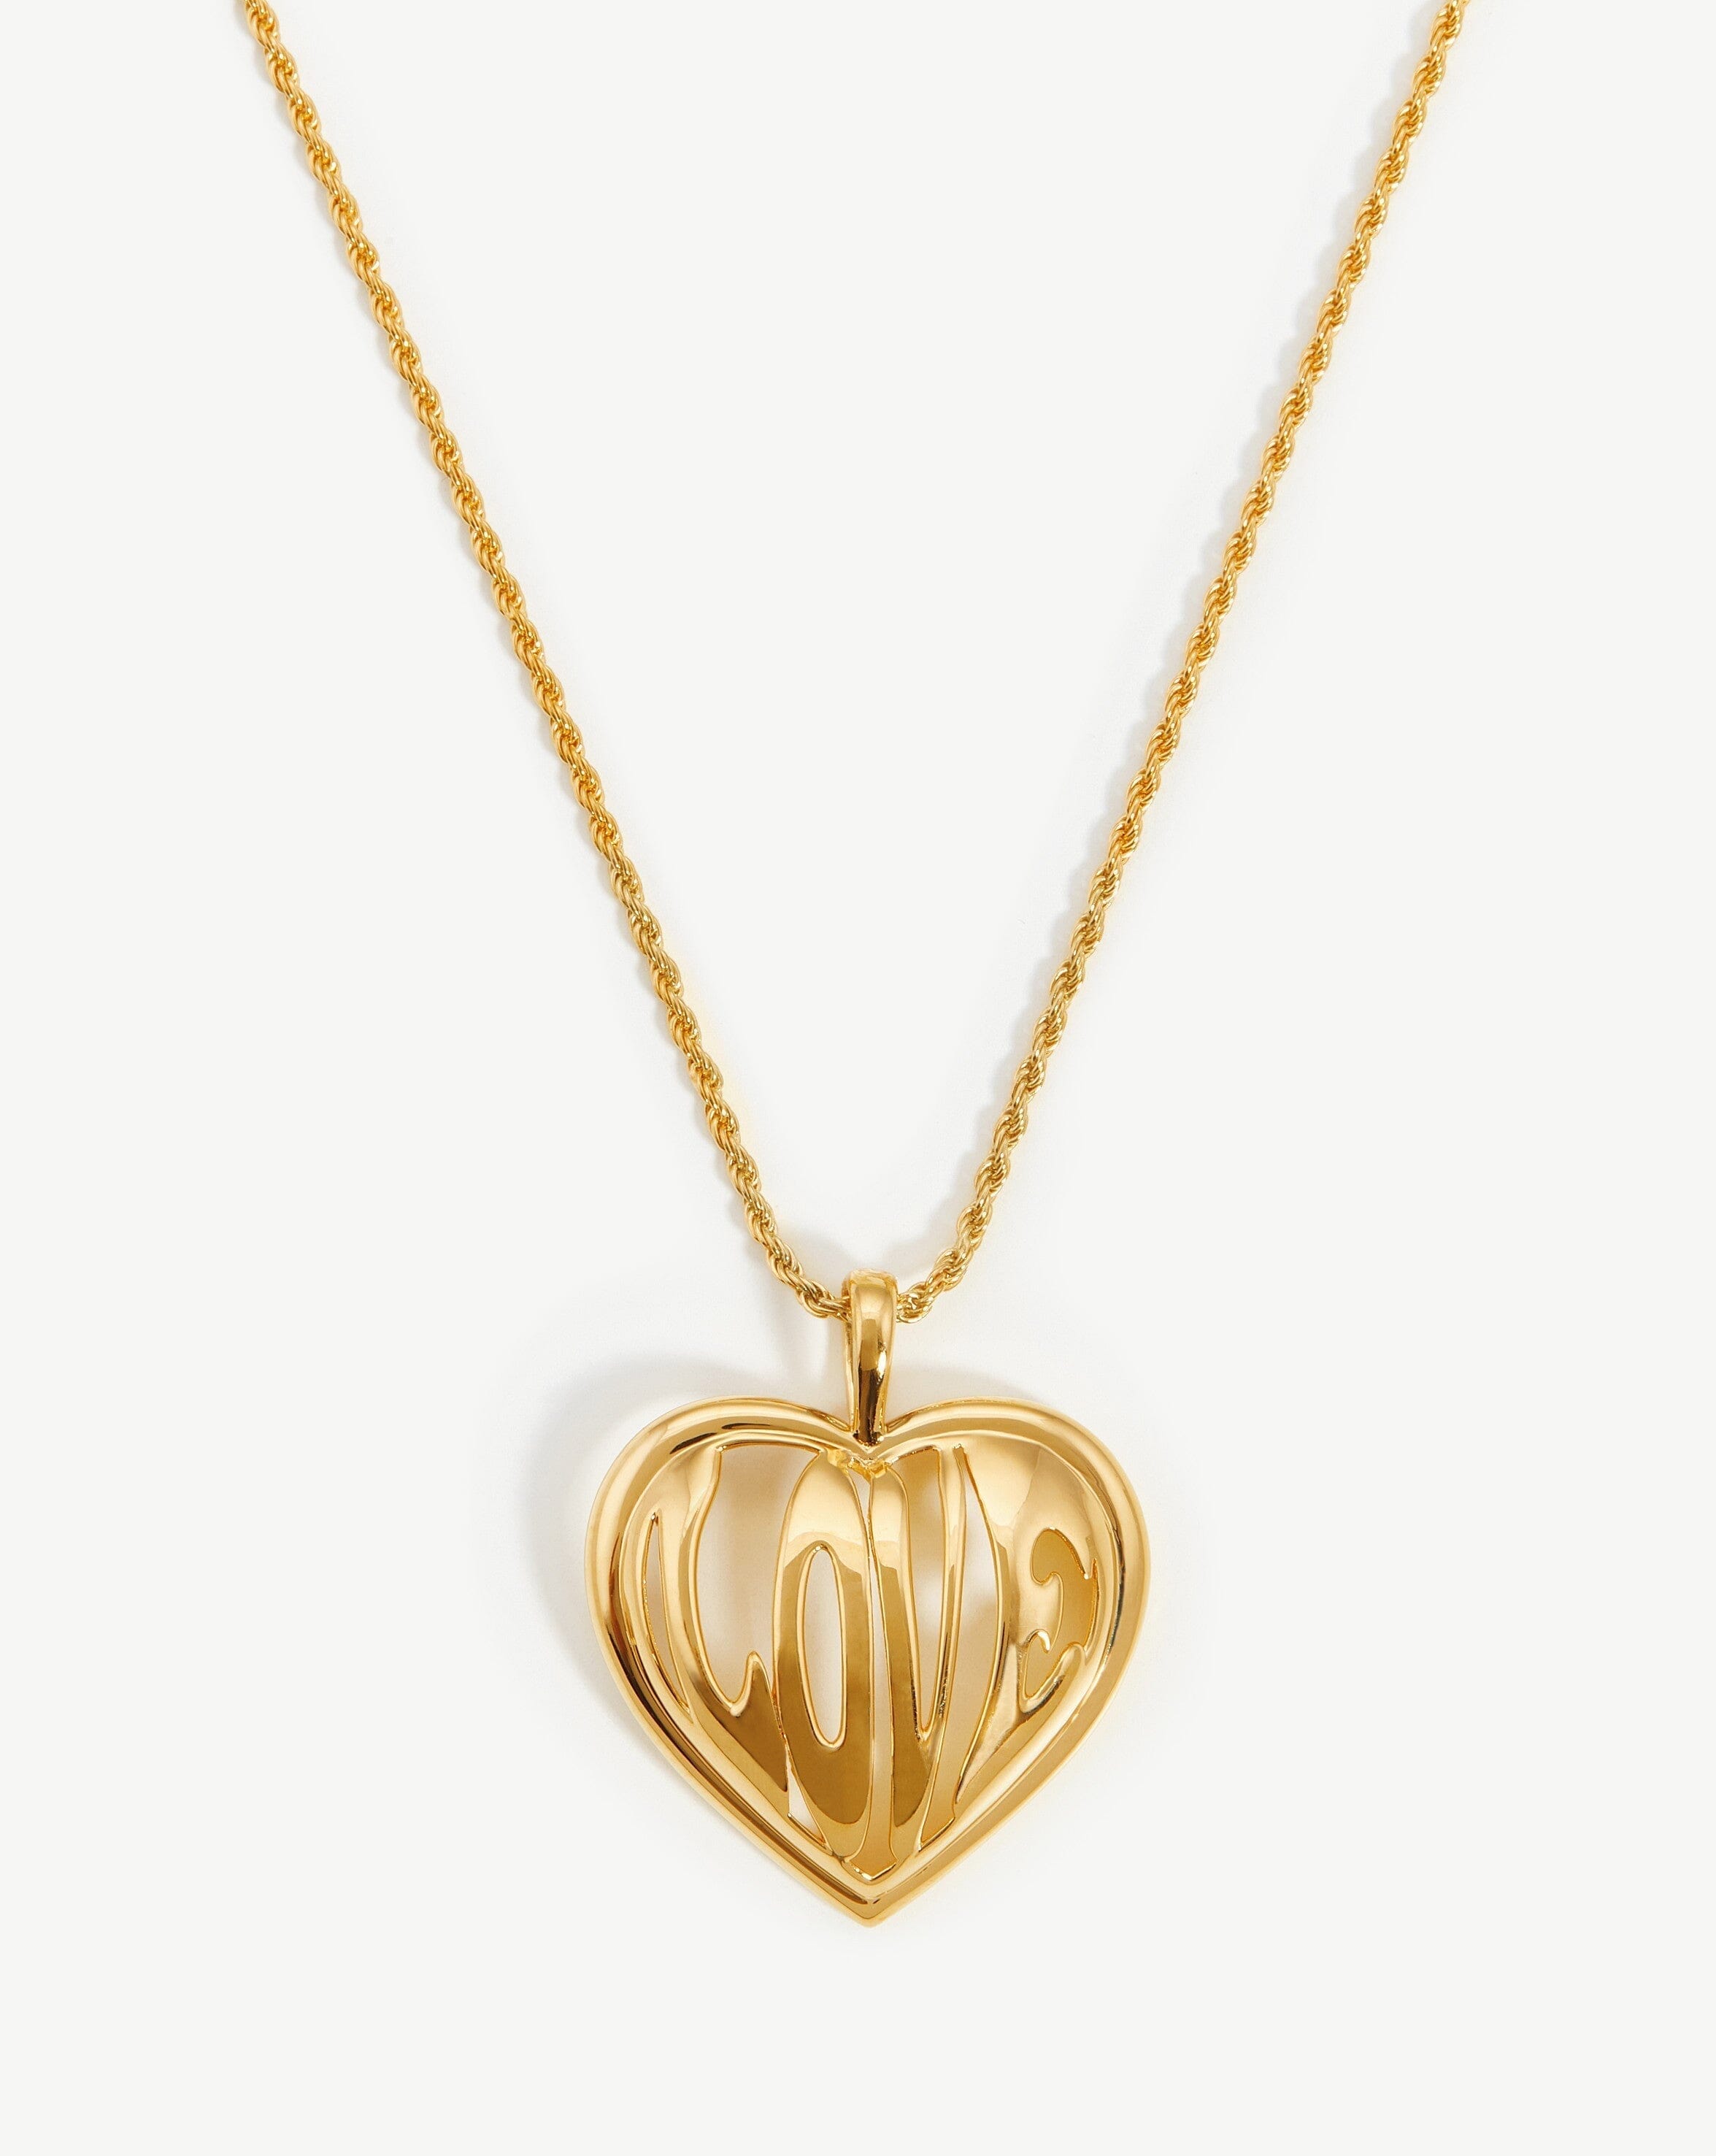 14K Gold Filled Necklace with Colorful Heart Pendant